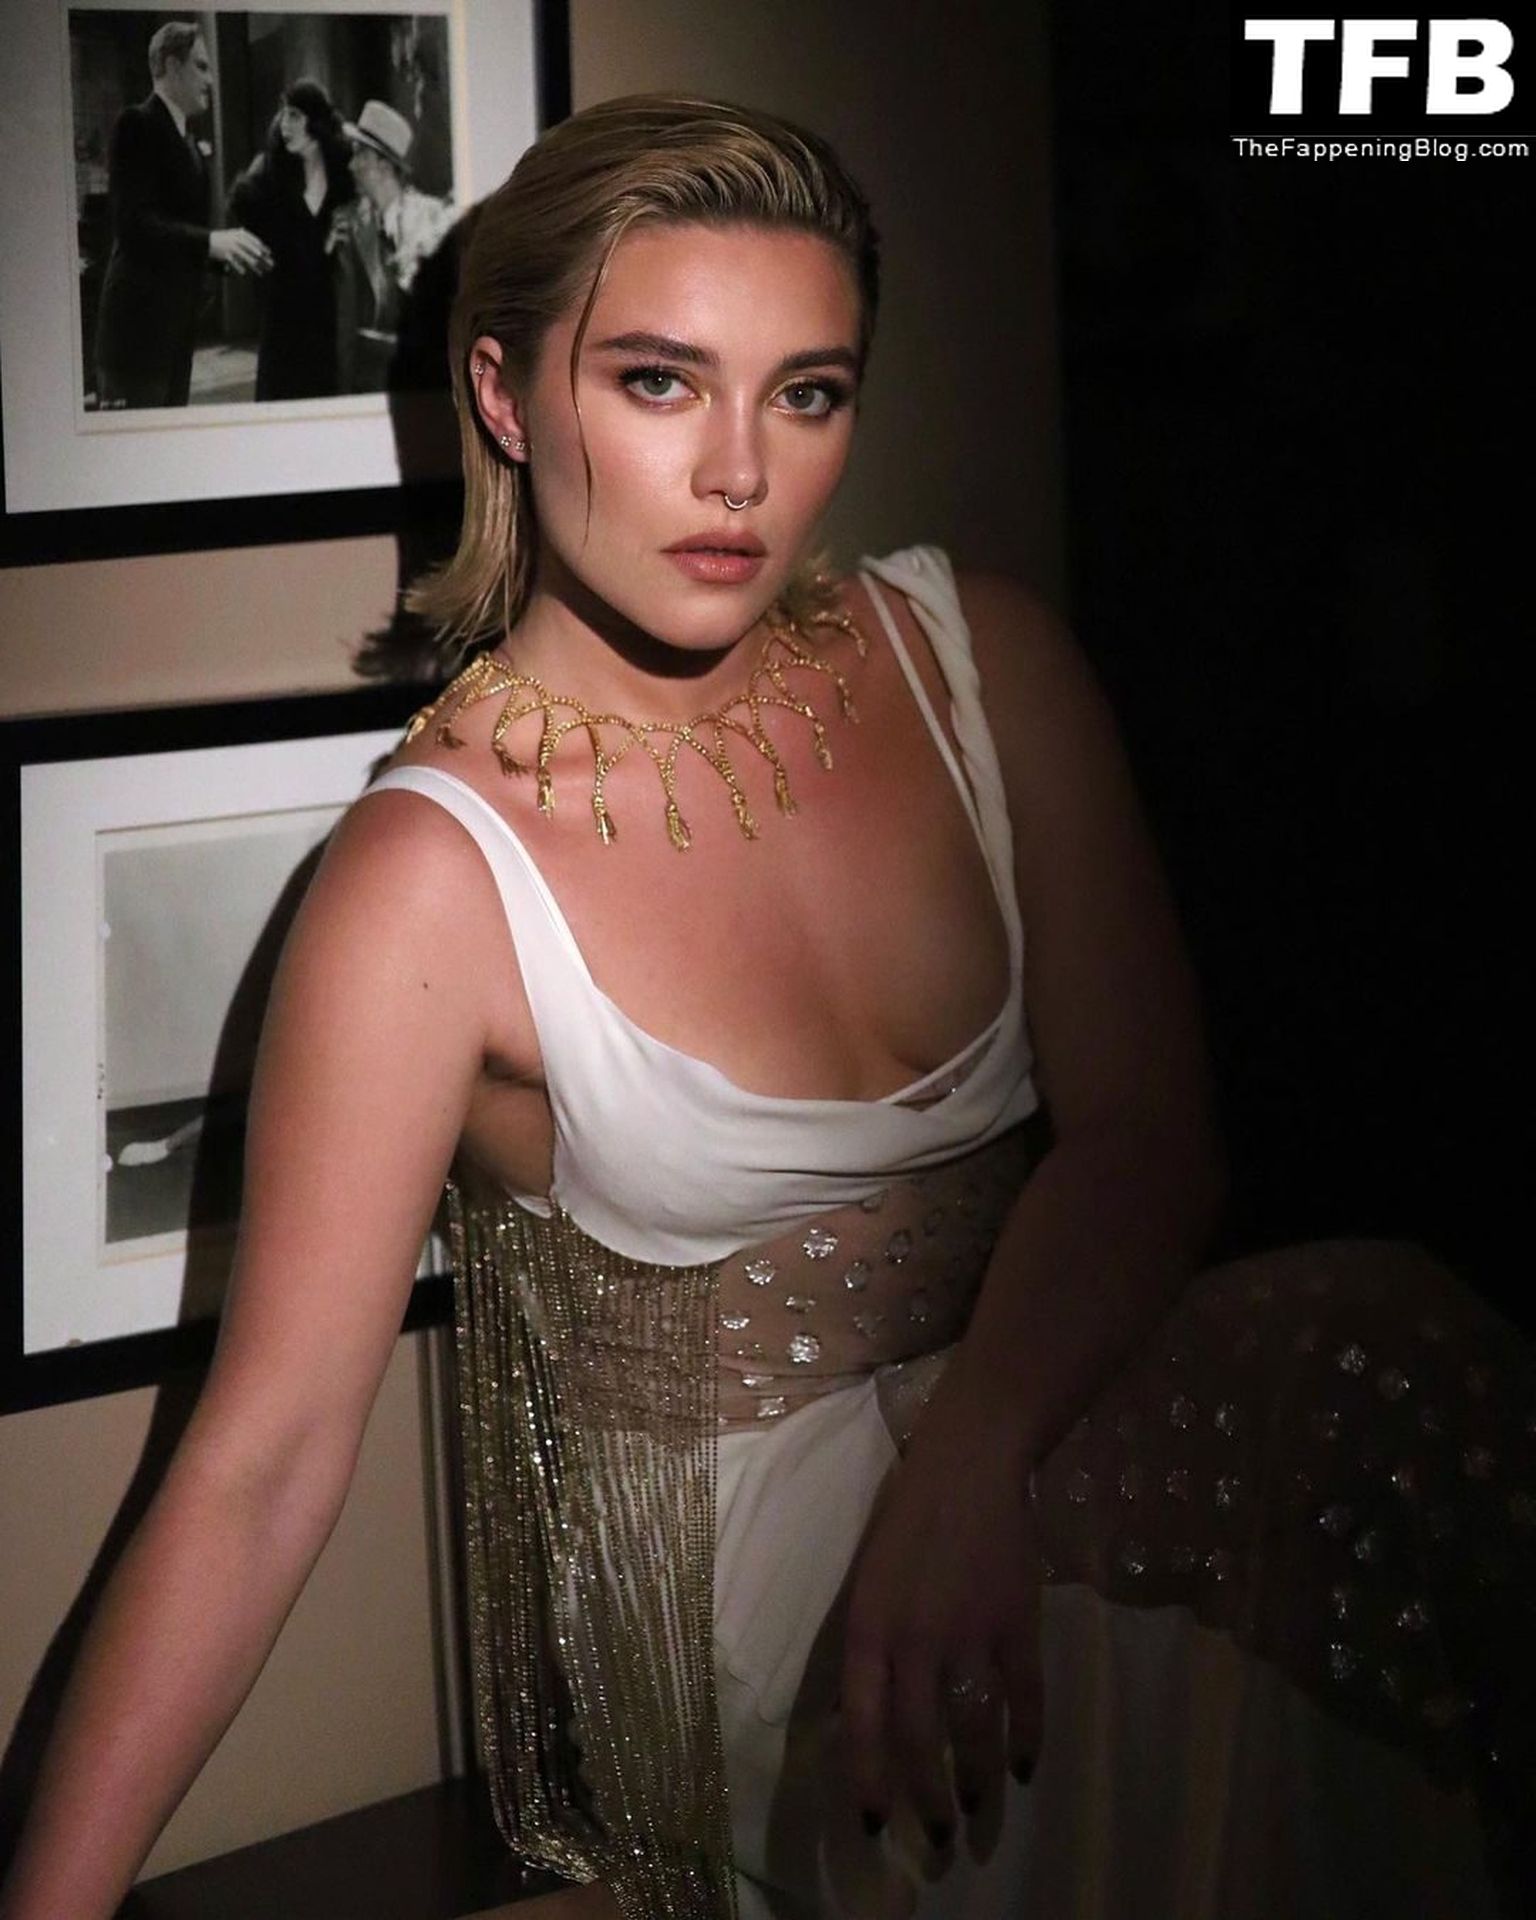 Florence-Pugh-Sexy-The-Fappening-Blog-26.jpg